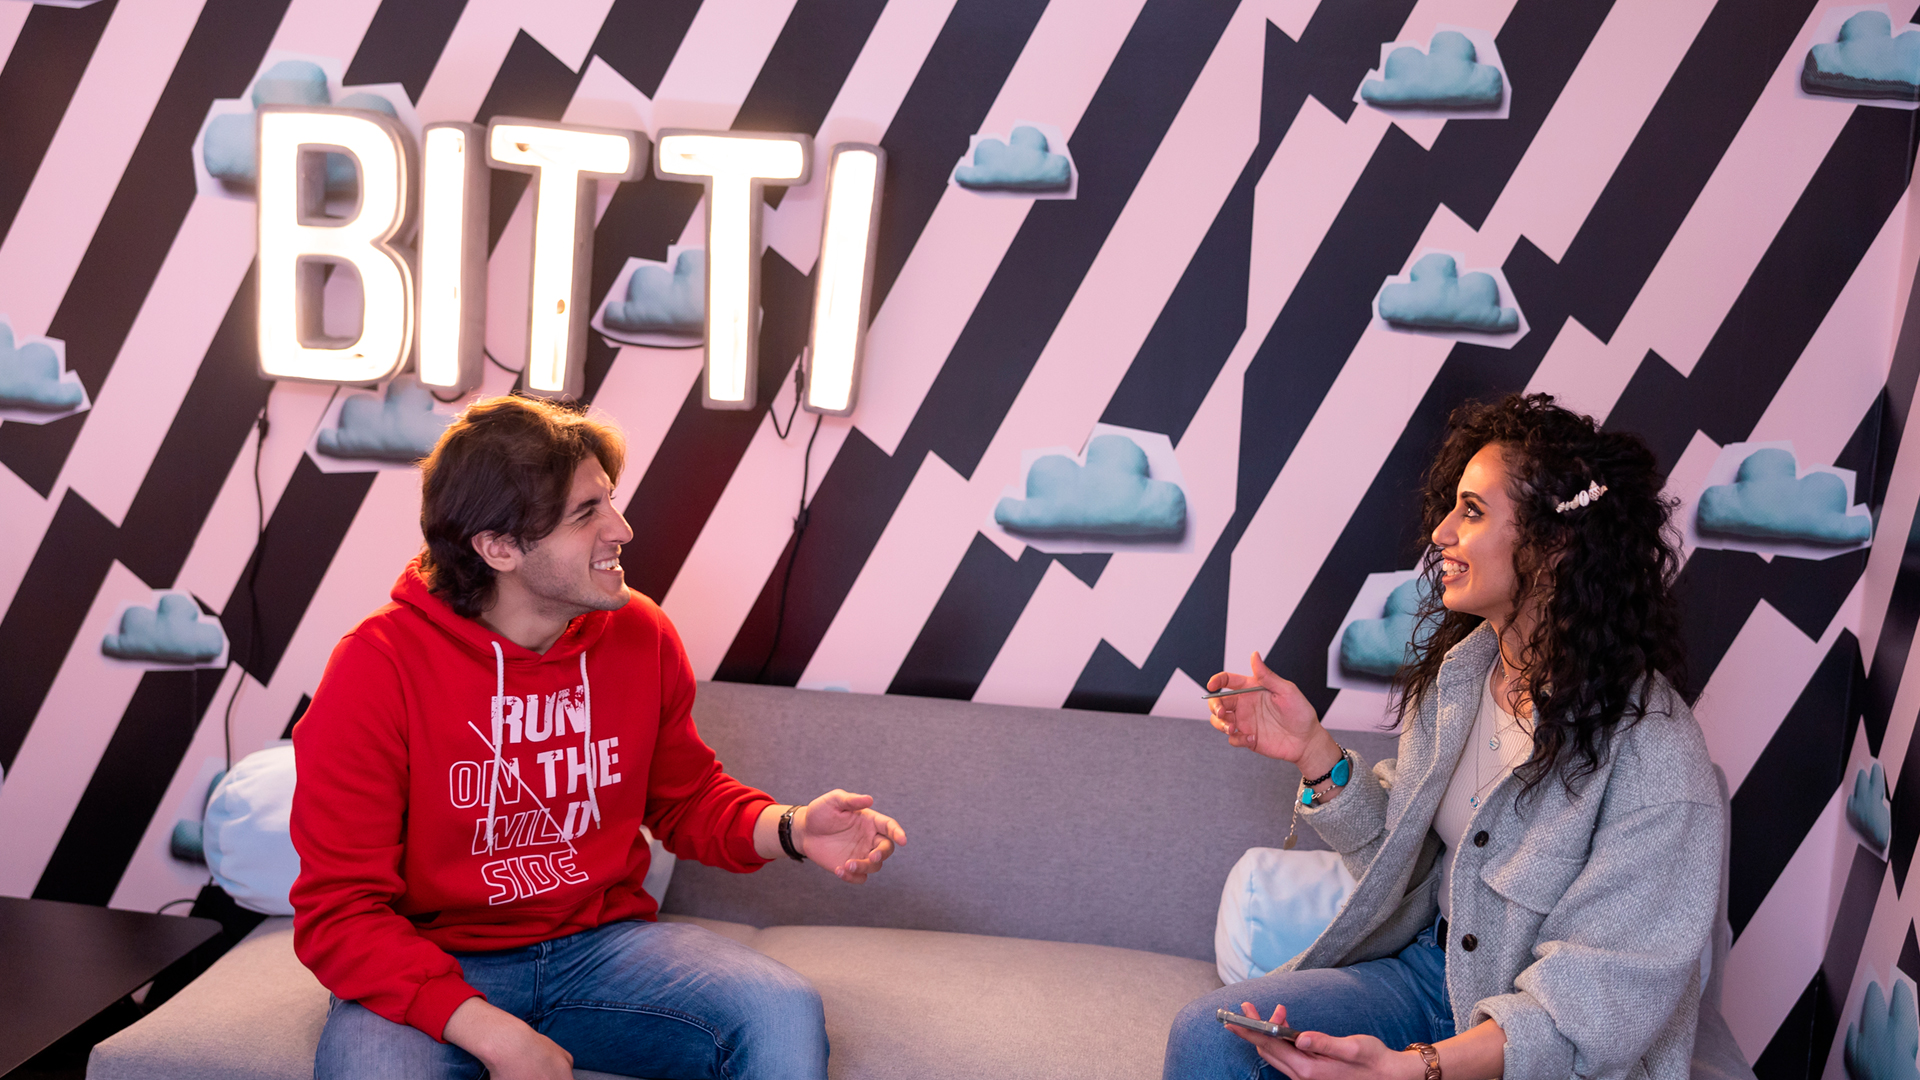 Two people are sitting on a sofa and laughing in front of a colourful wall. The wall has black and pink stripes and the shapes of clouds on it. One of the people has the word “bitti” written with light letters on the wall behind her.